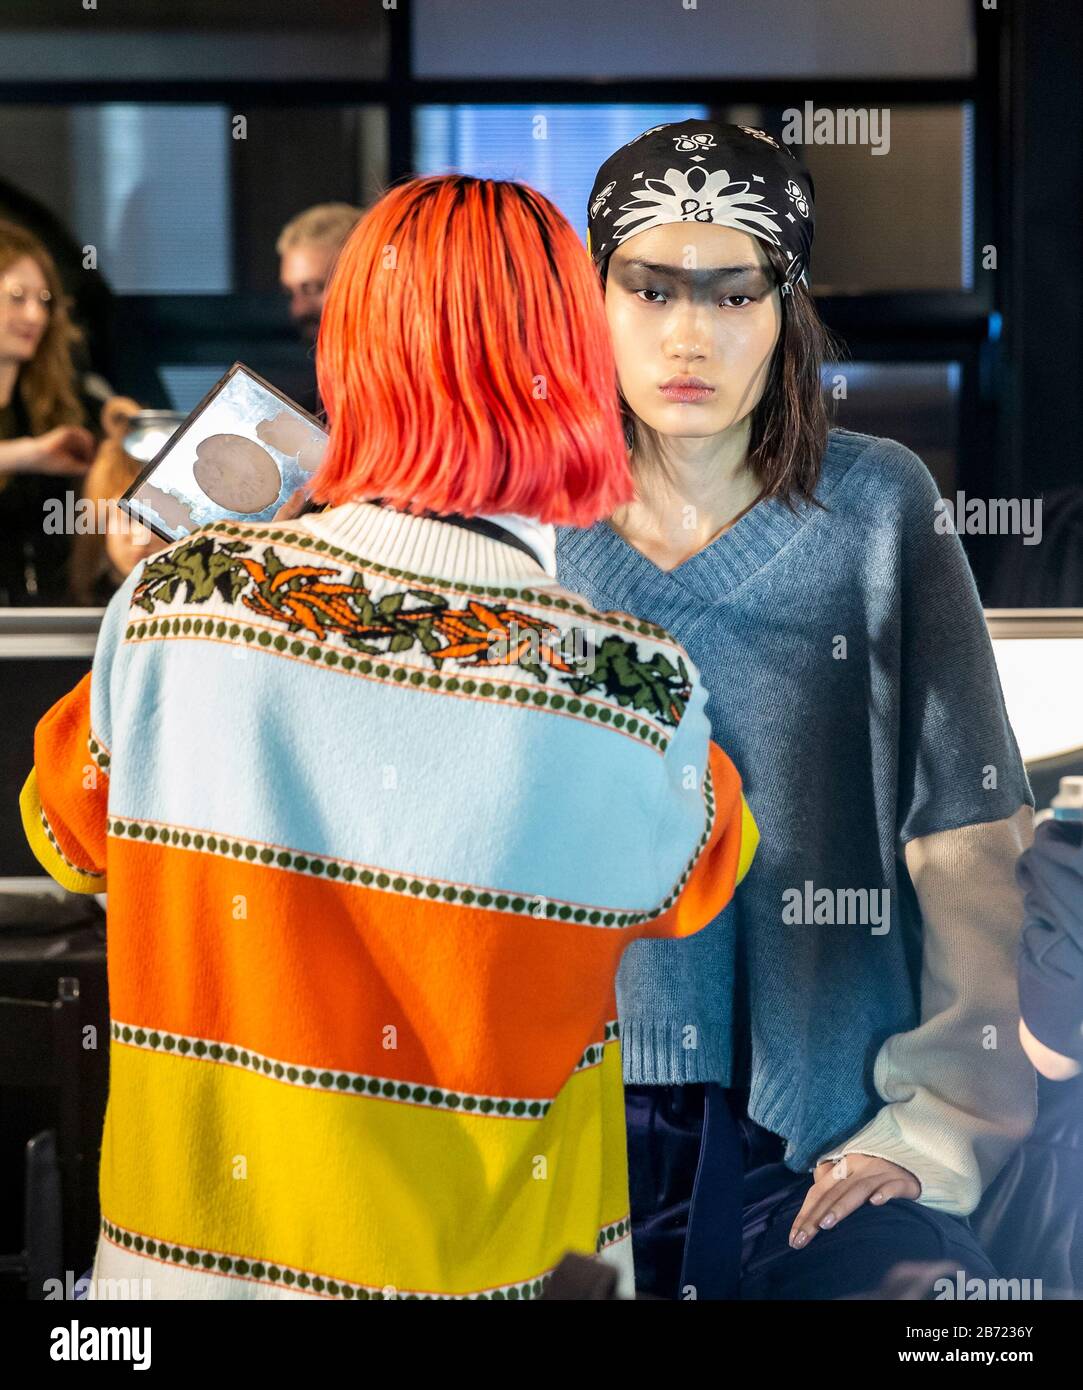 New York, NY - February 08, 2020: A model prepares backstage for the R13 Fall Winter 2020 fashion show during New York Fashion Week Stock Photo